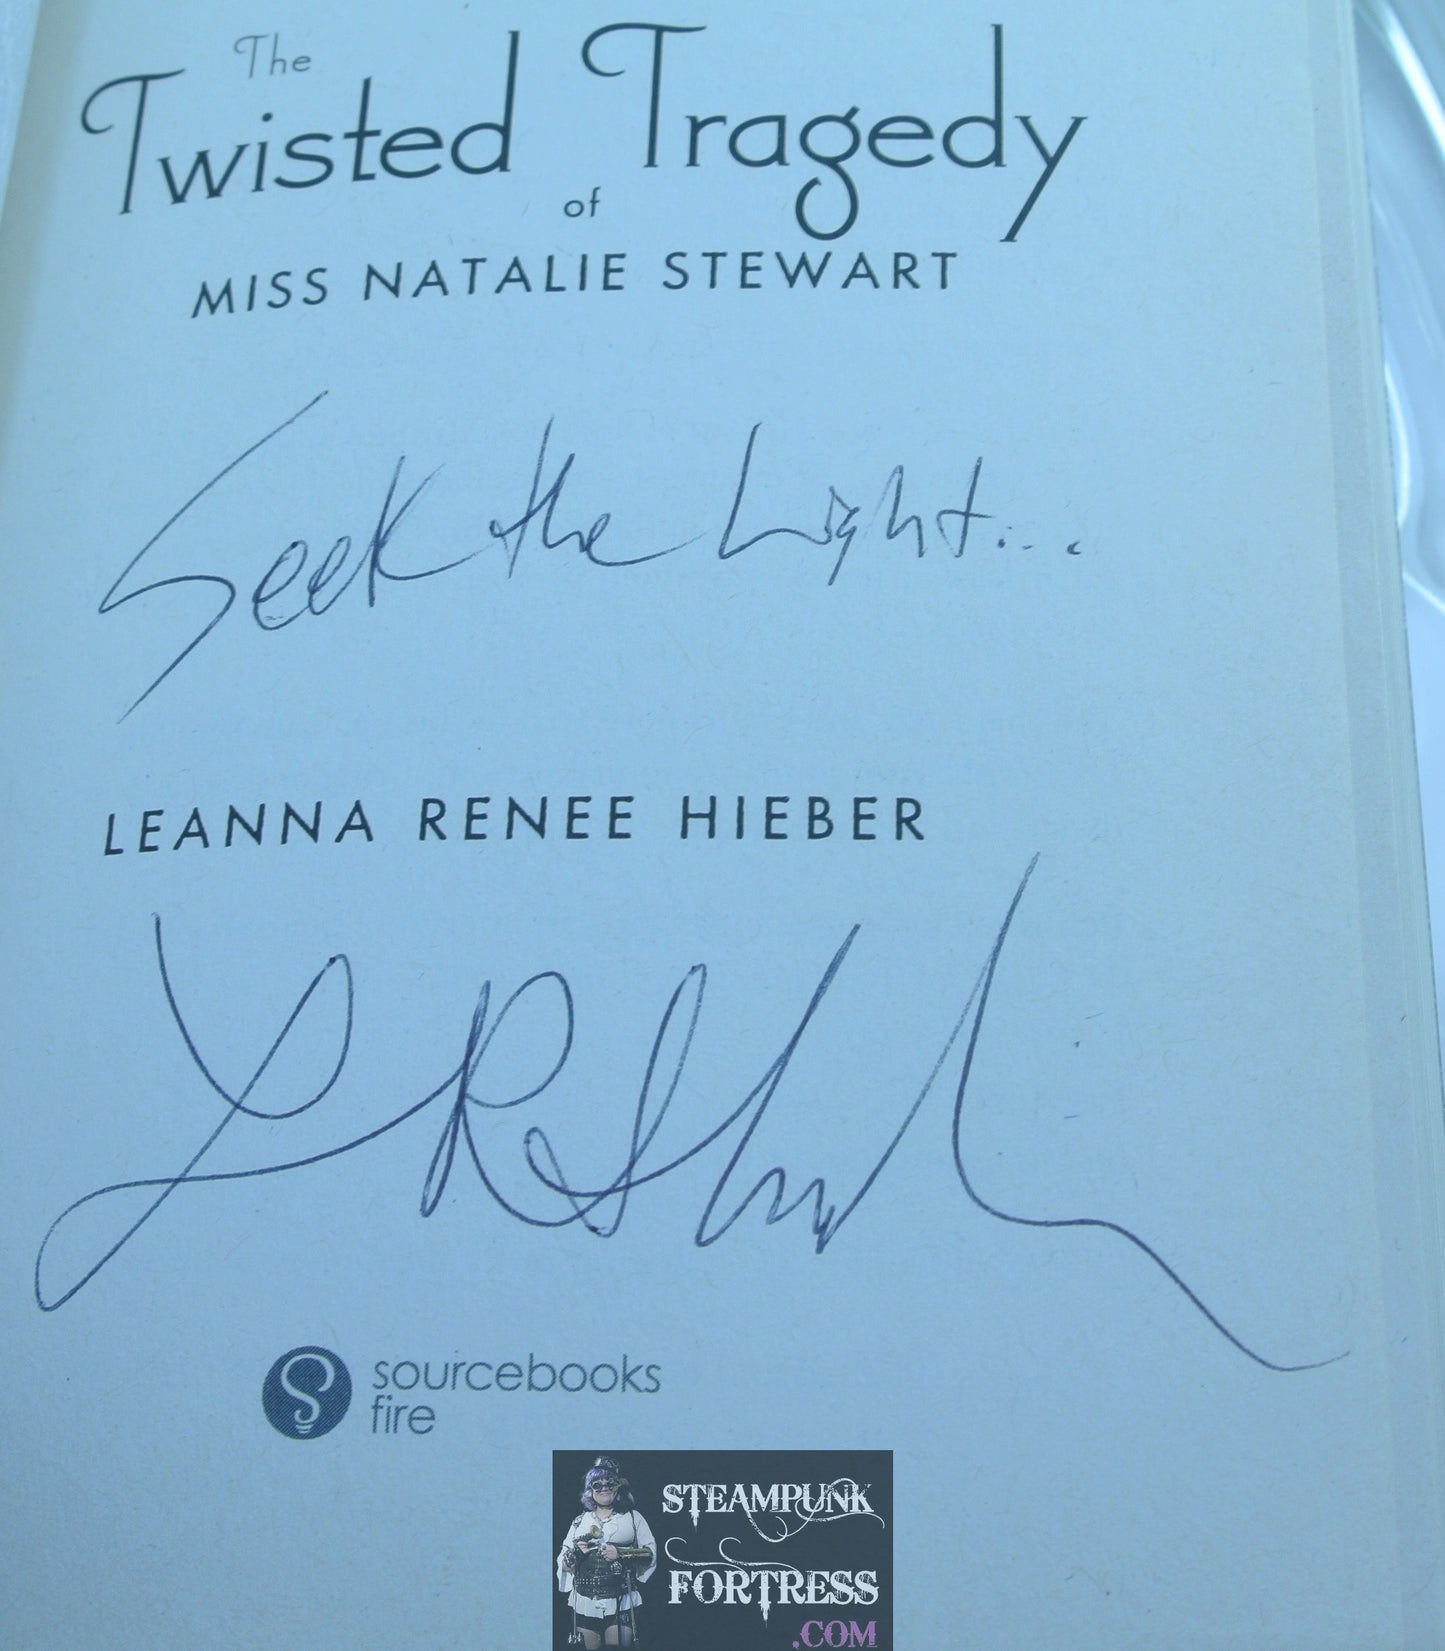 TWISTED TRAGEDY OF MISS NATALIE STEWART LEANNA RENEE HIEBER AUTOGRAPHED SIGNED BOOK PAPERBACK VERY GOOD STEAMPUNK GOTHIC MAGIC